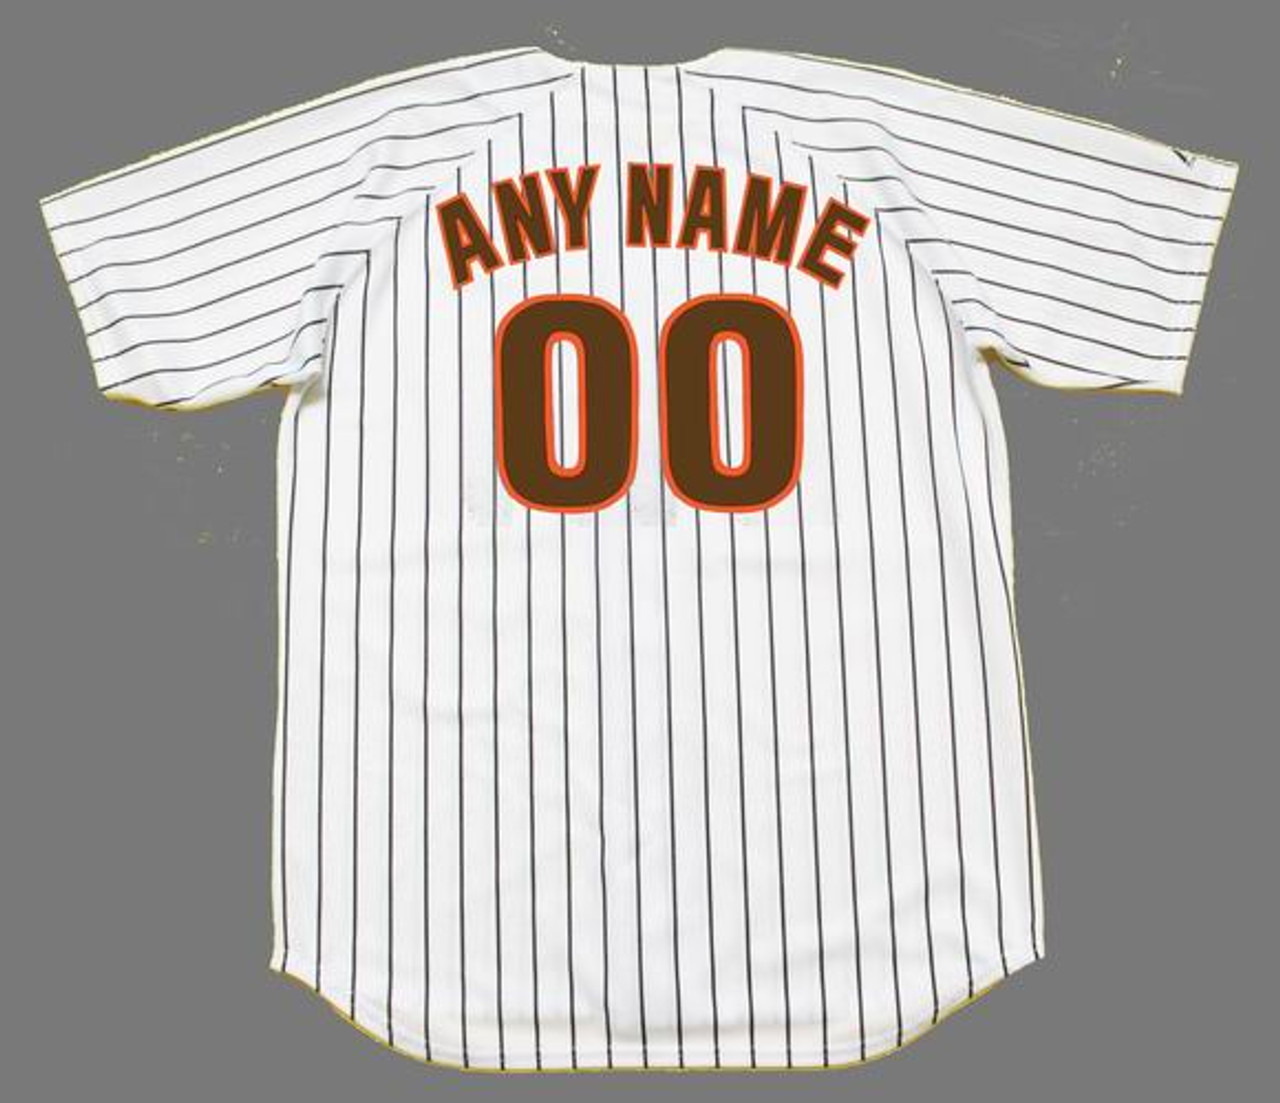 SAN DIEGO PADRES 1980's Majestic Home Throwback Jersey Customized Any Name  & Number(s) - Custom Throwback Jerseys